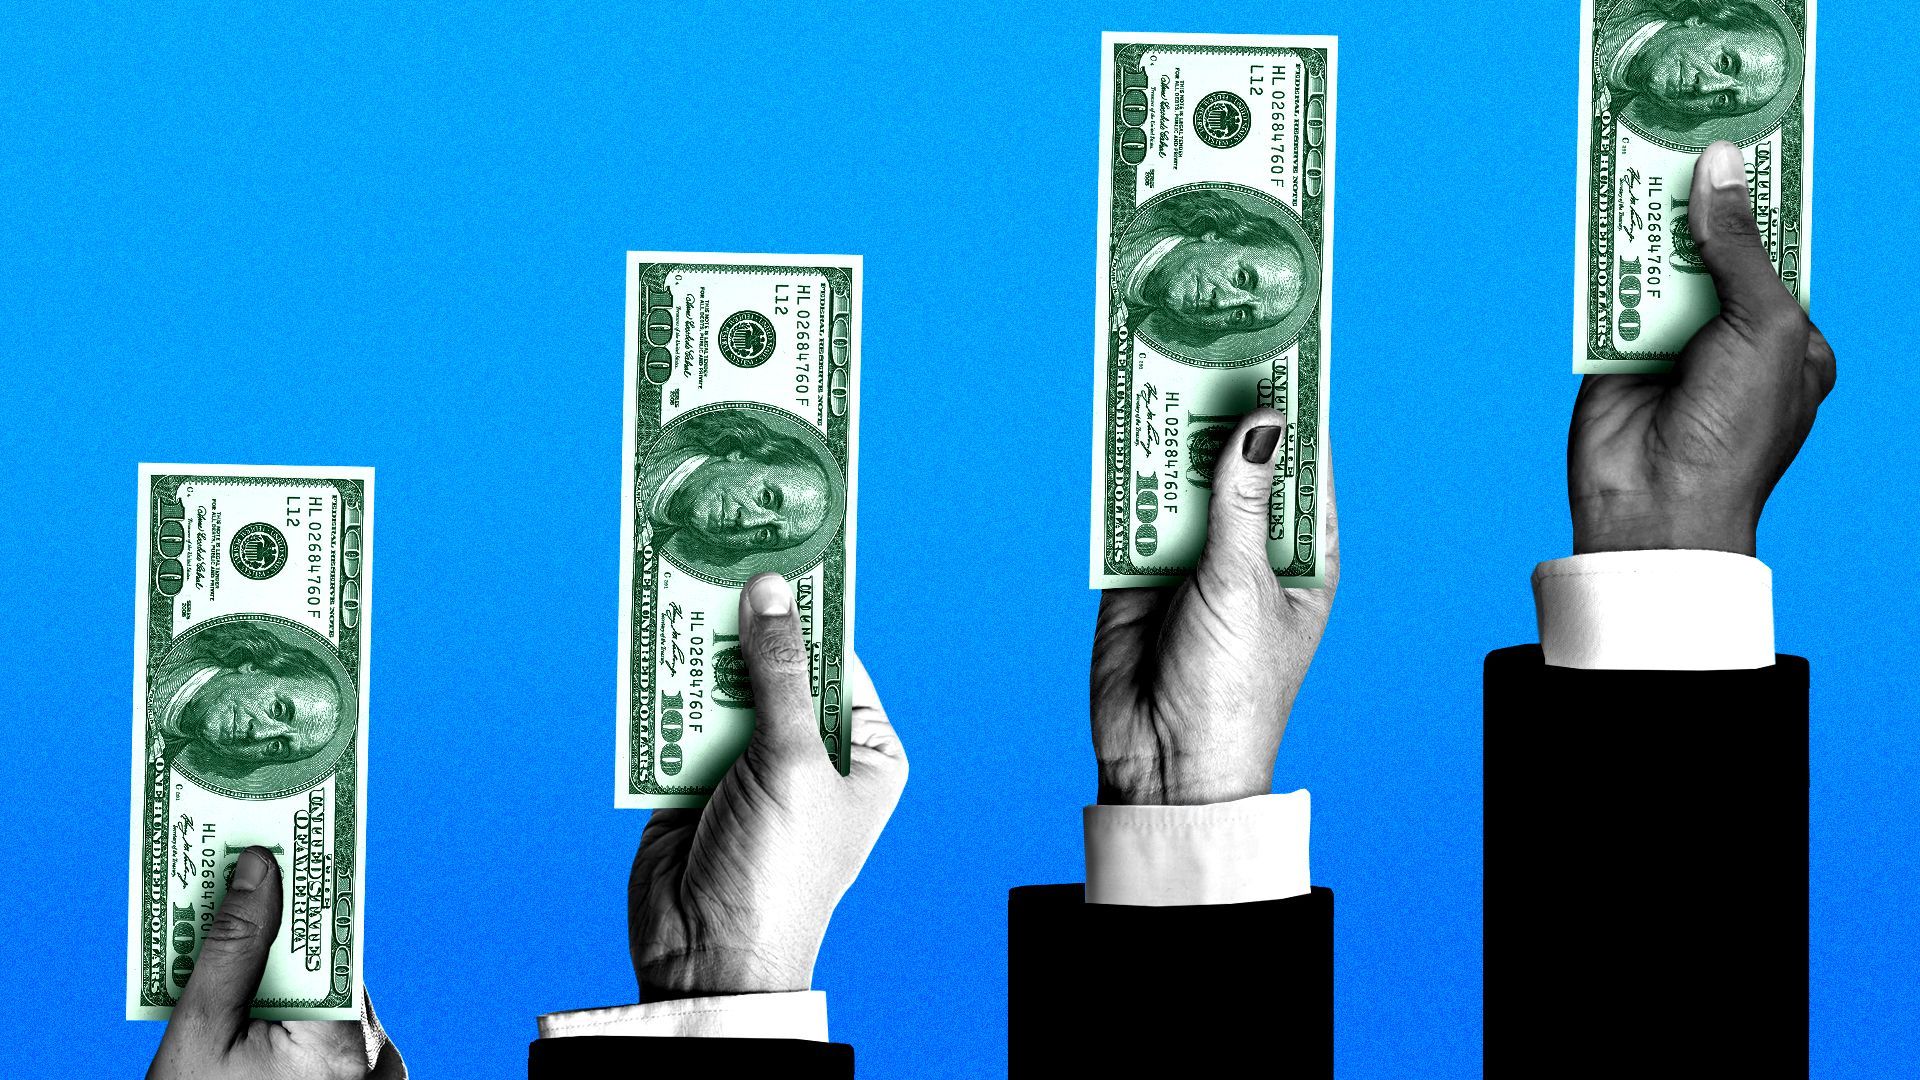 Illustration of hands holding up one hundred dollar bills. Each arm is in a row and getting progressively taller, to indicate growth.